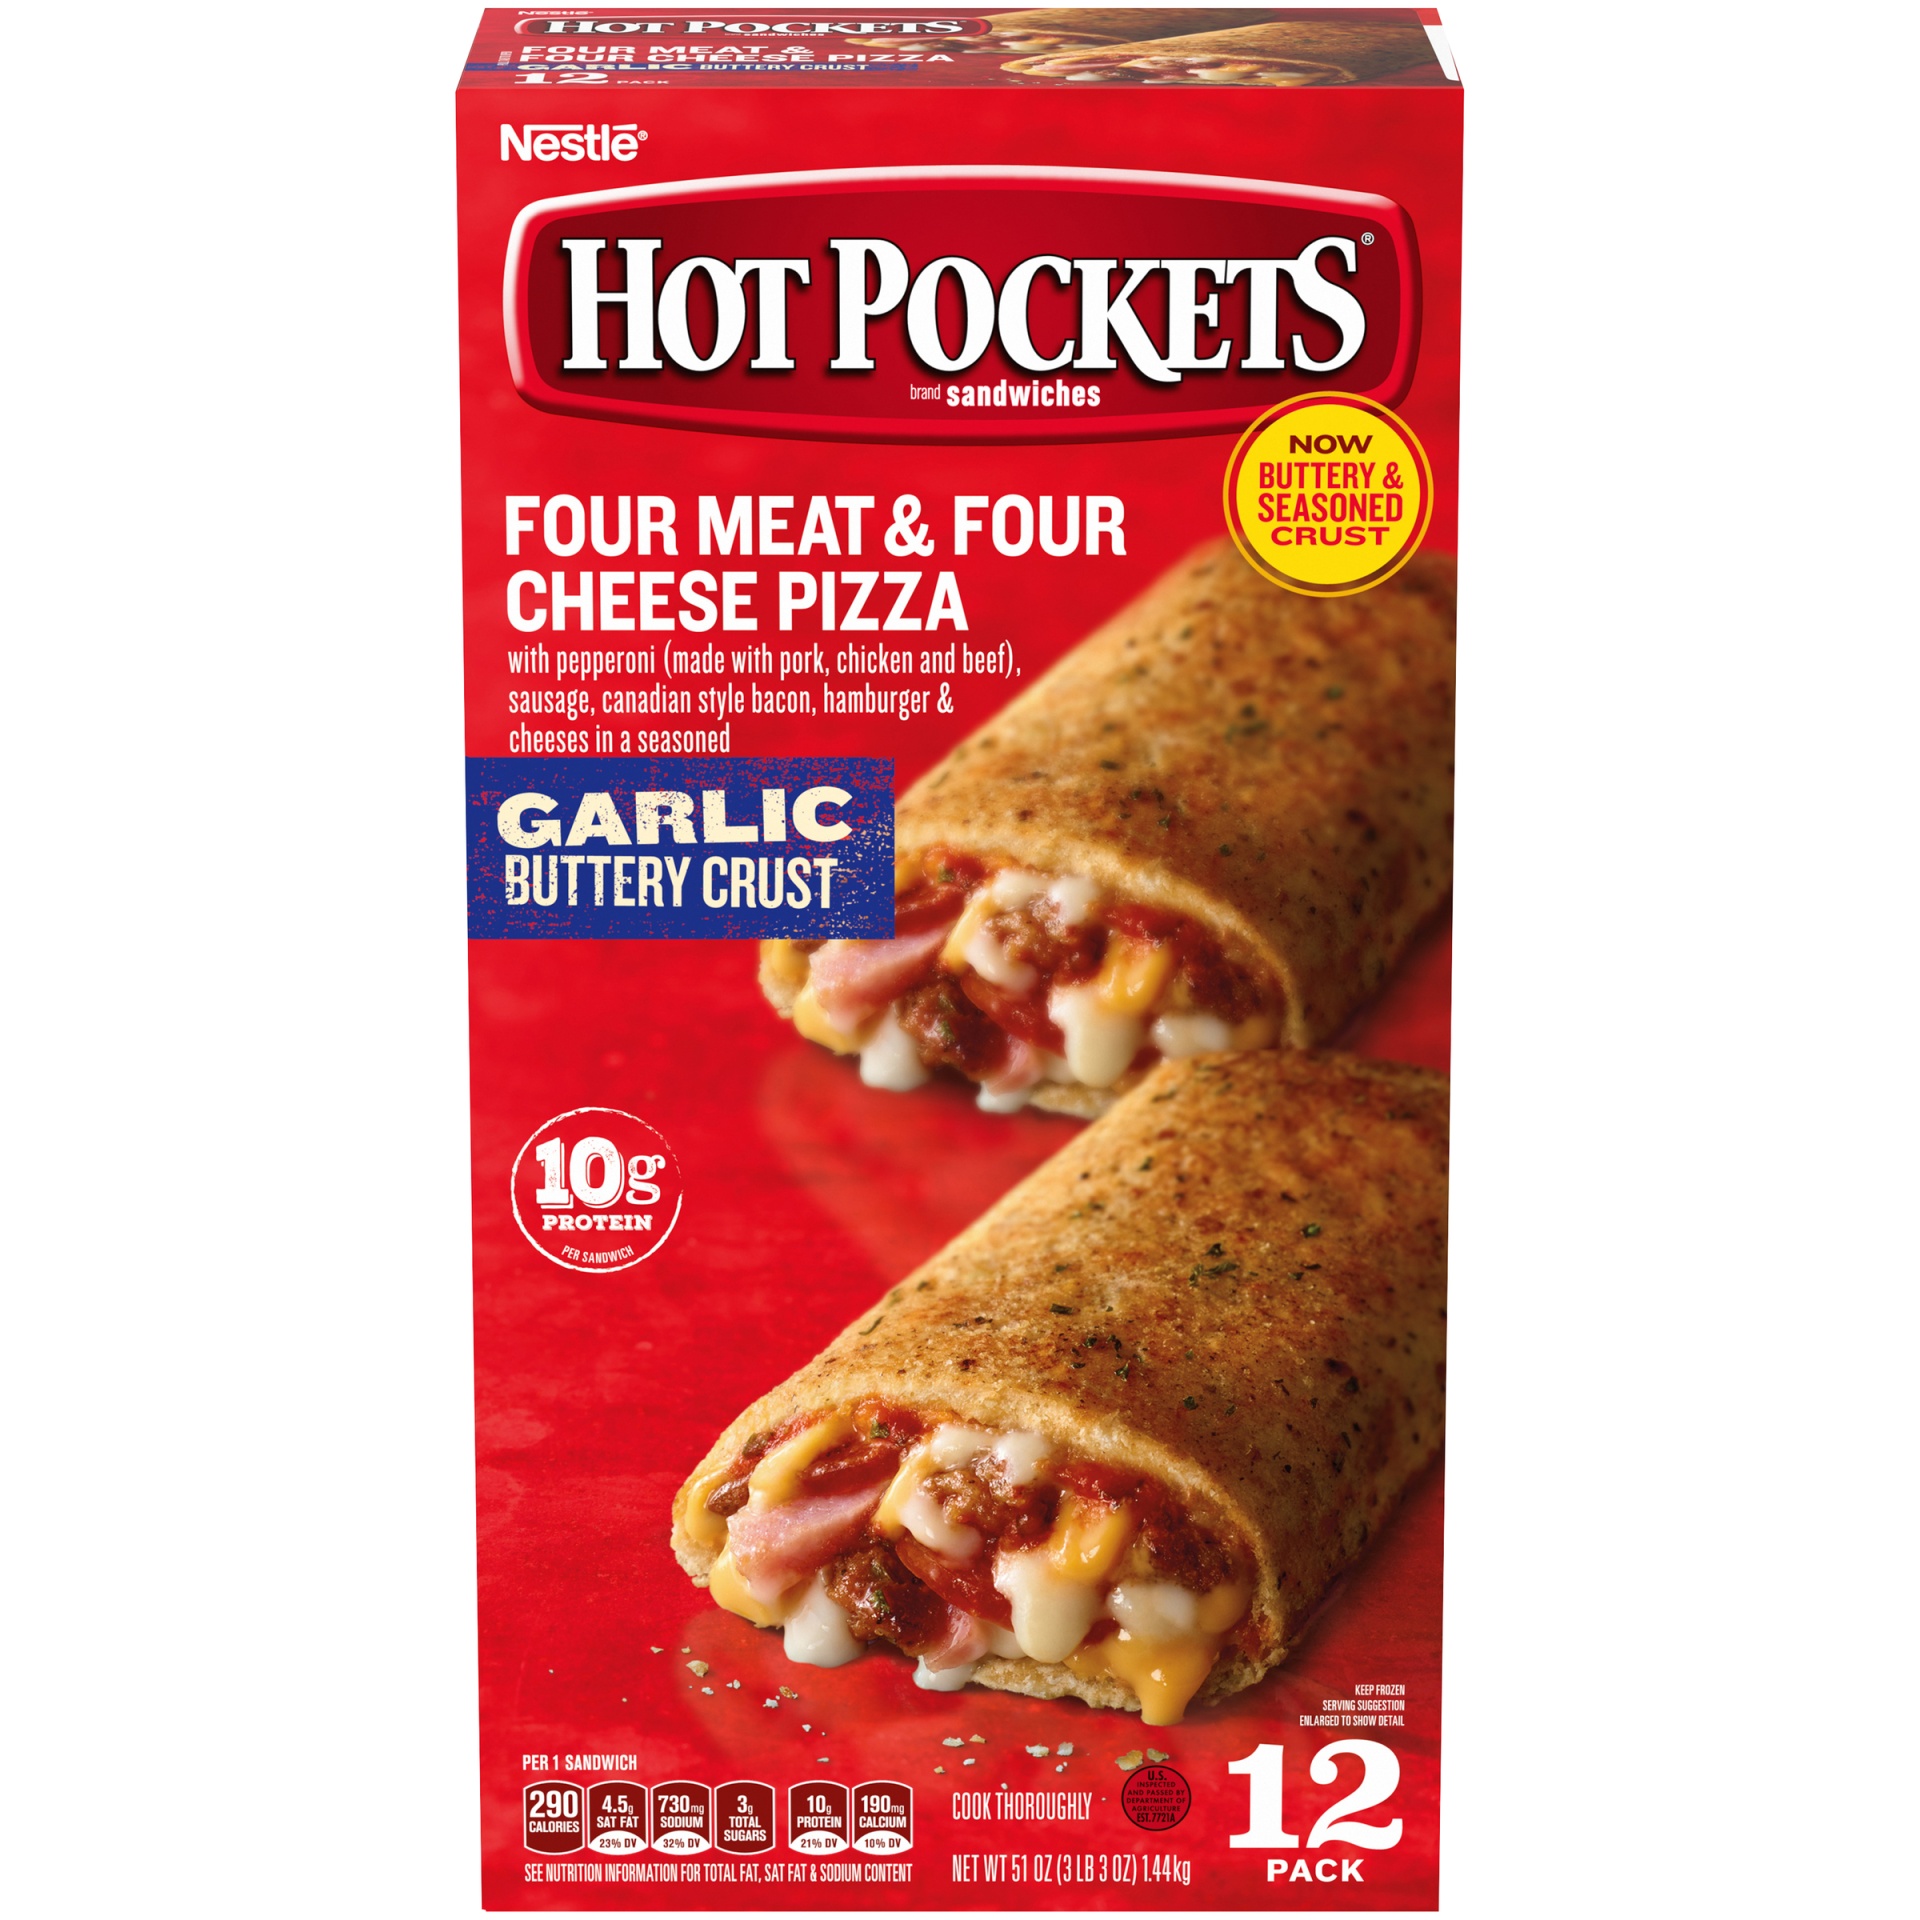 slide 2 of 6, Hot Pockets Four Meat And Four Cheese Pizza Garlic Buttery Crust Frozen Sandwiches, 12 ct; 4.5 oz